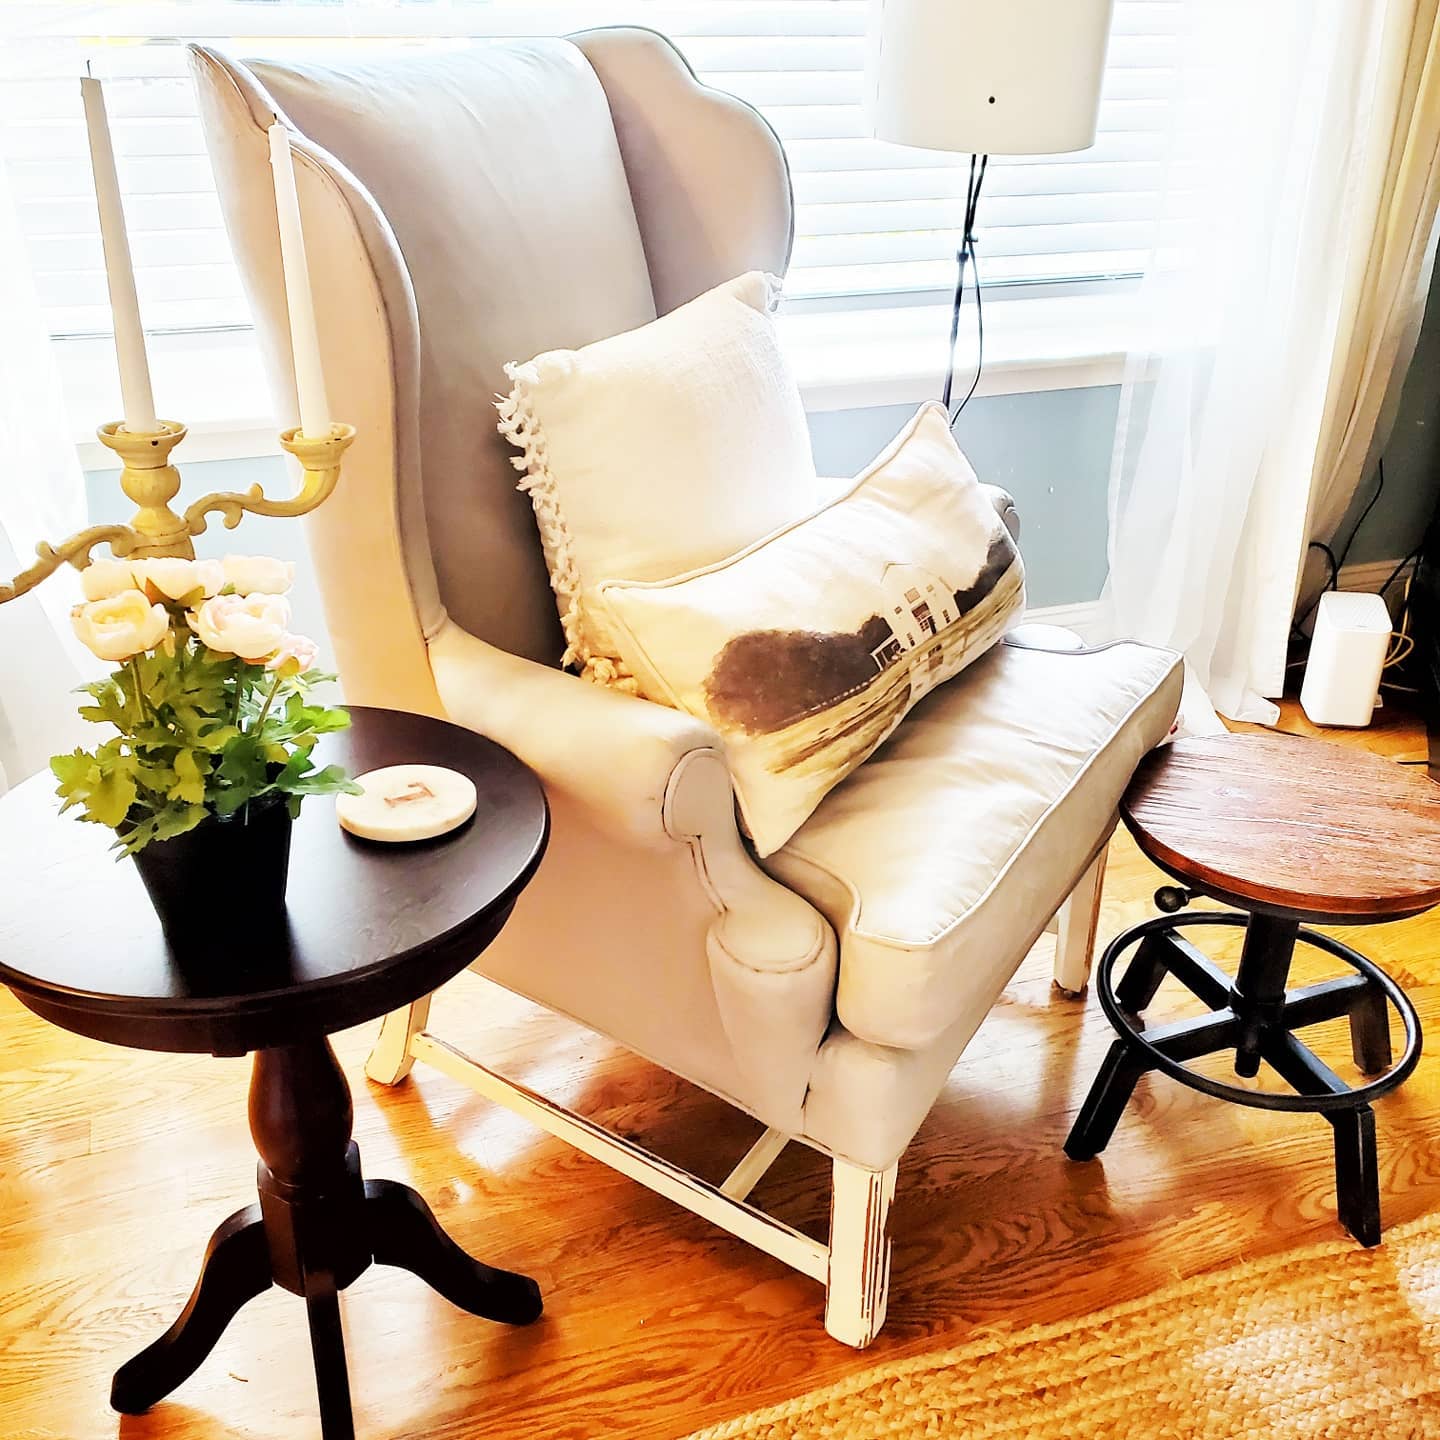 How to Paint a Fabric Chair